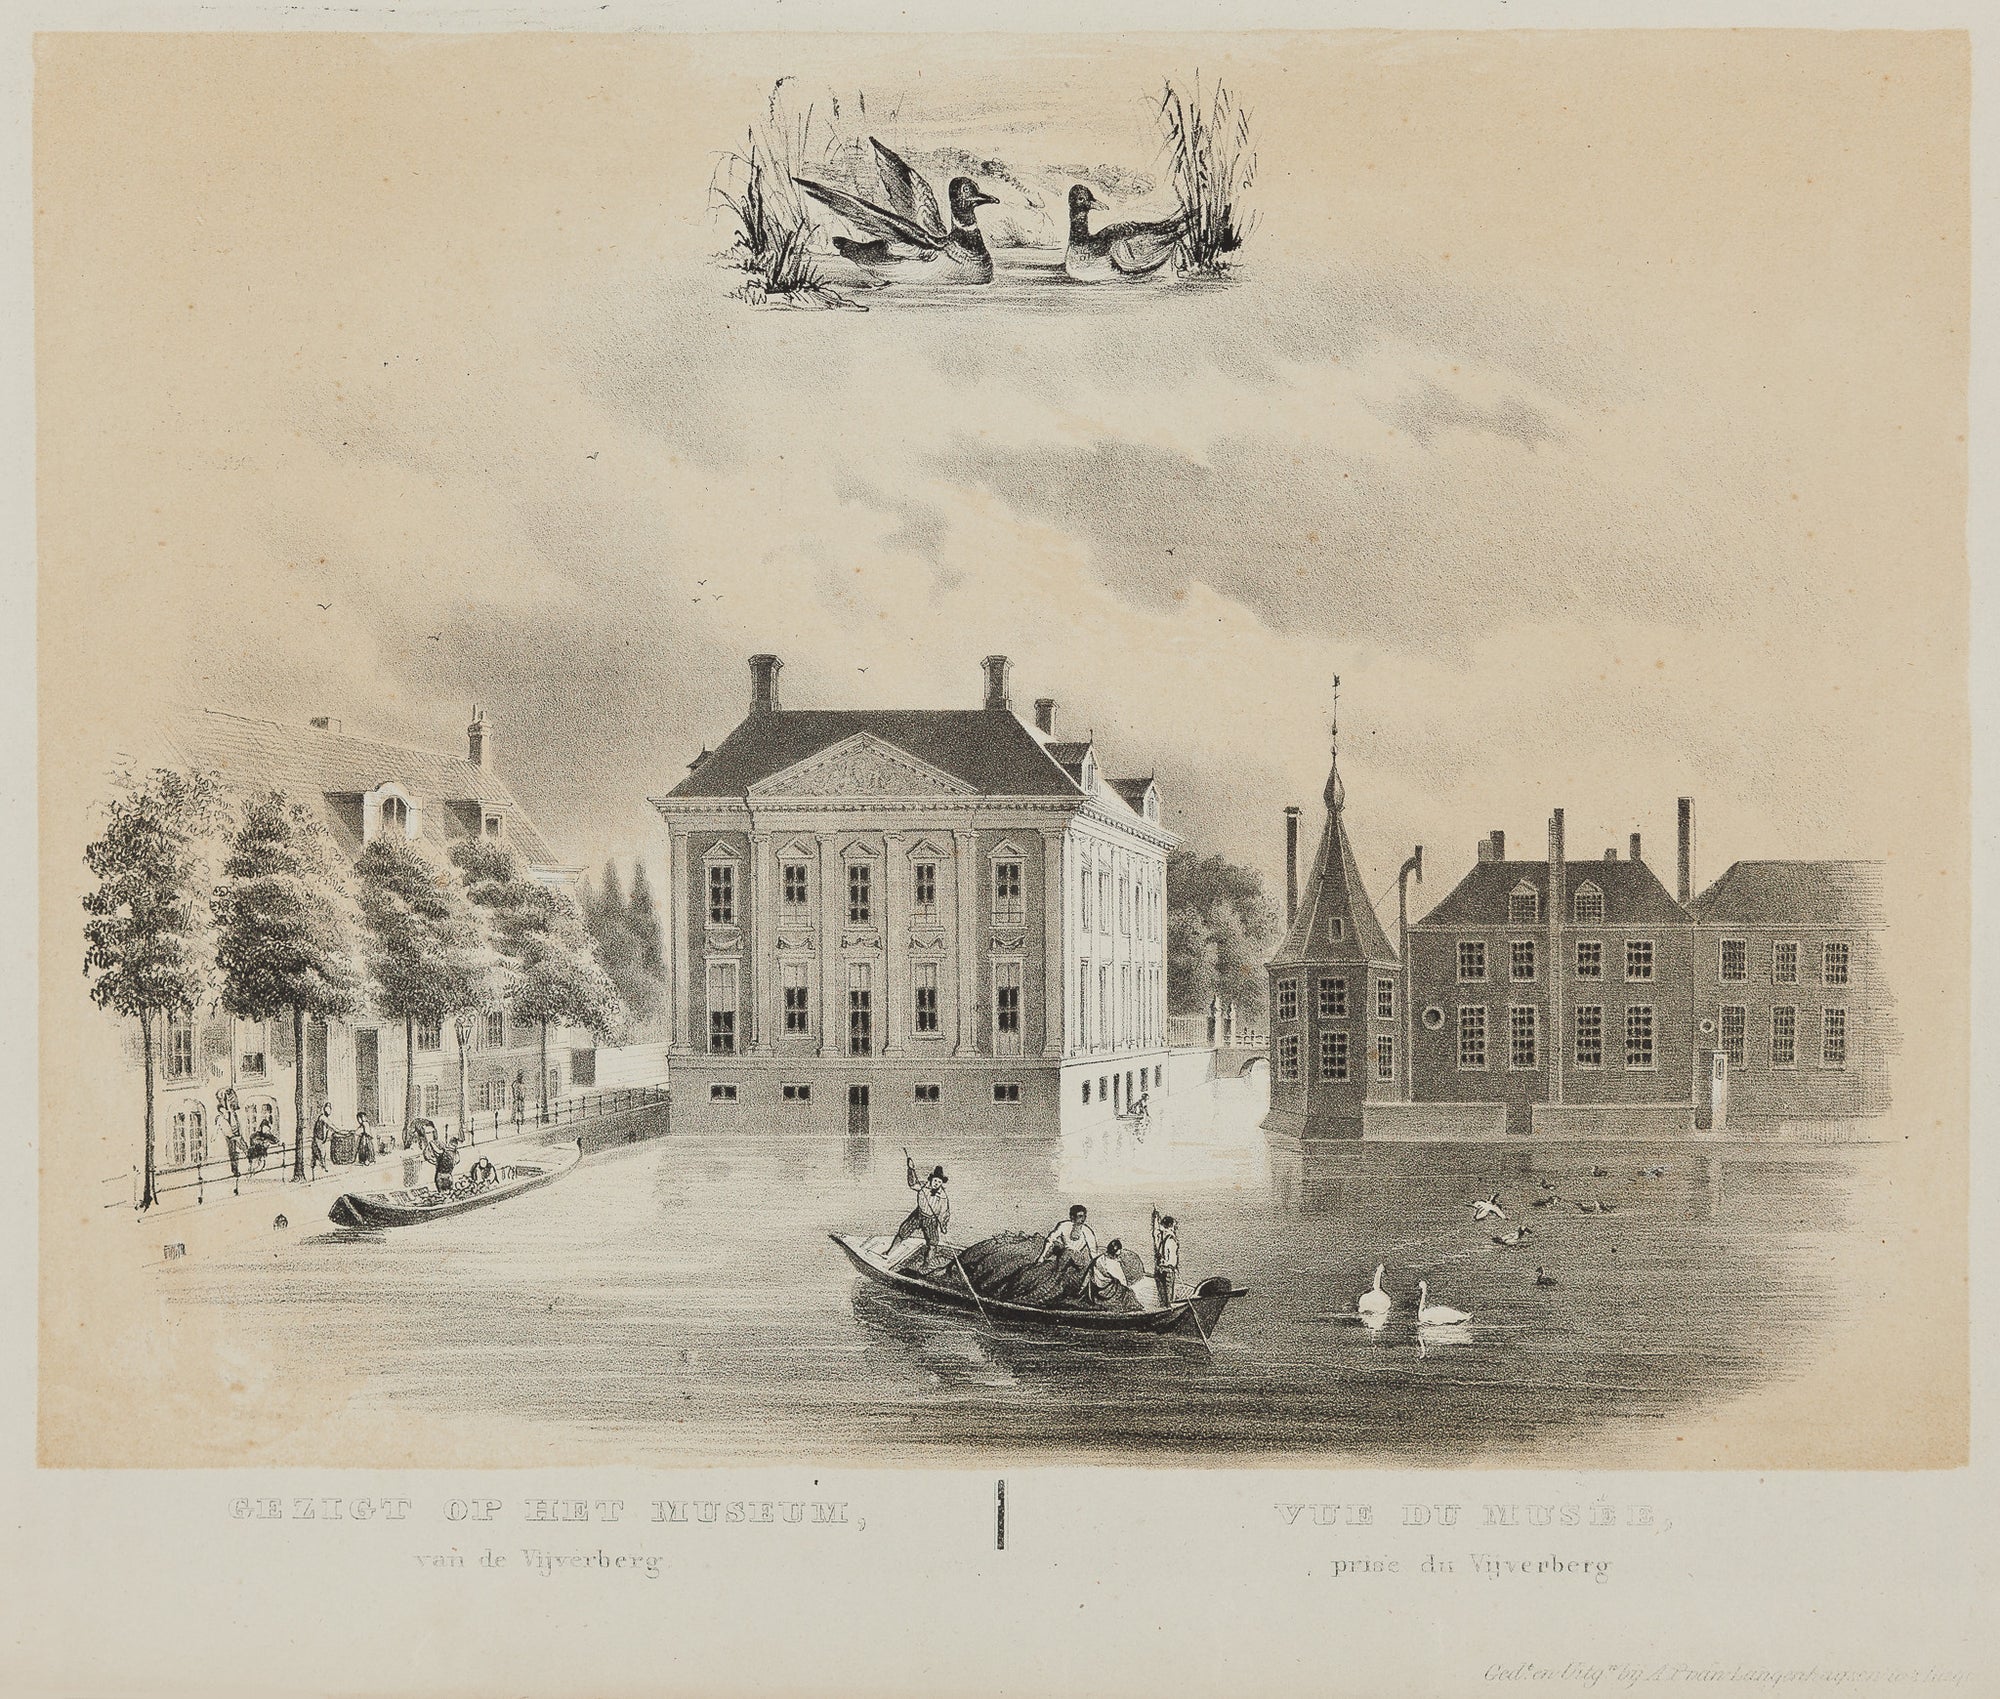 Museum Mauritshuis at the Hofvijver, at the left the Korte Vijverberg and at the right the buildings of the Binnenhof.